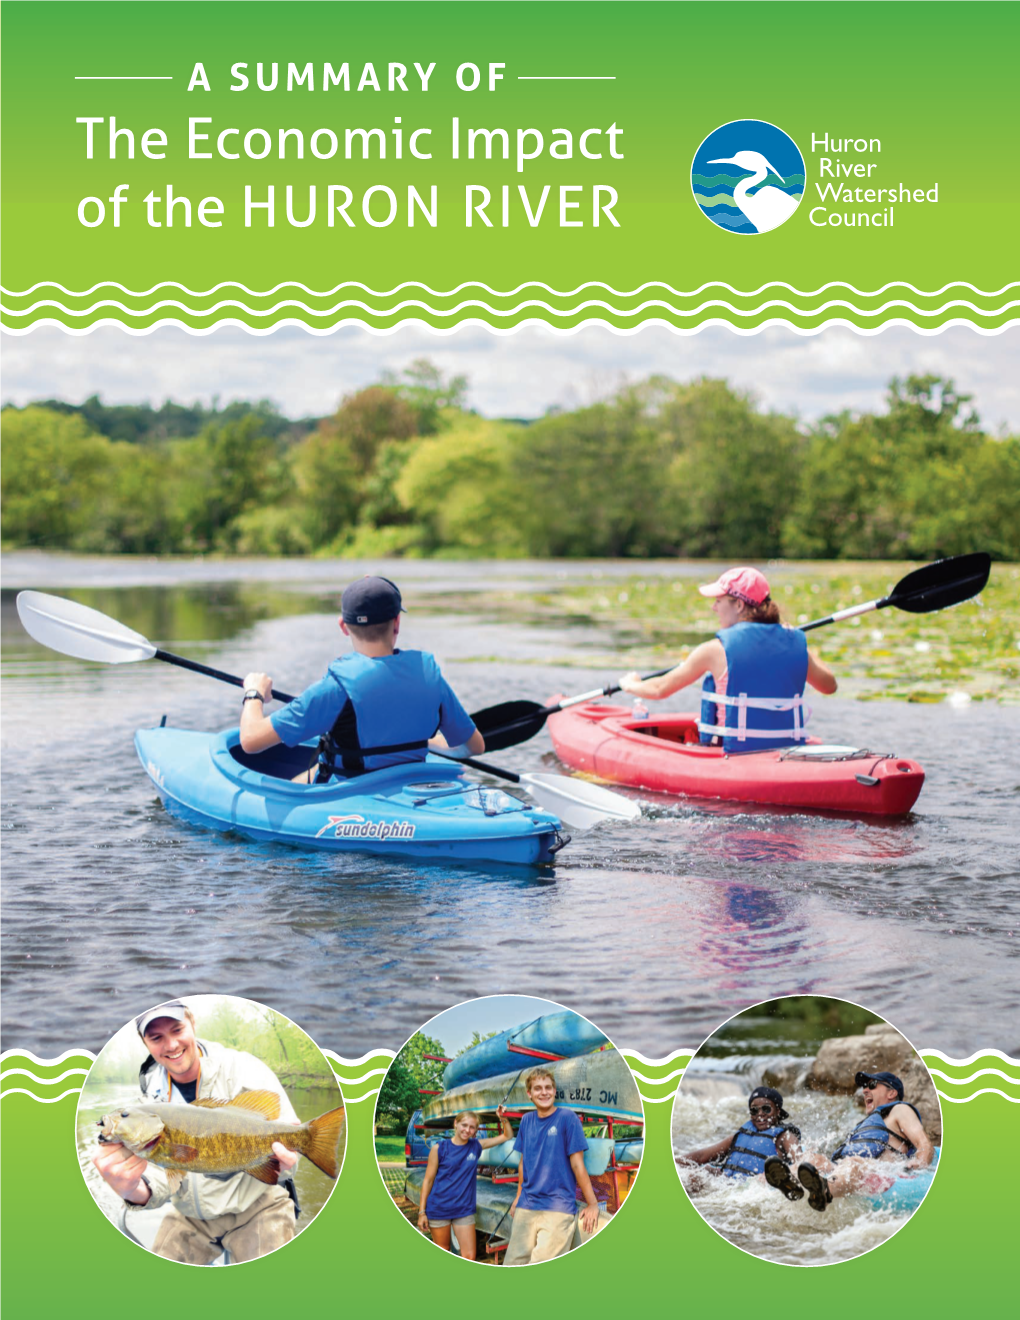 The Economic Impact of the HURON RIVER “Water-Based Recreation, Water-Focused Amenities, and Waterfront Property Are Key Segments of Michigan’S Economy.”